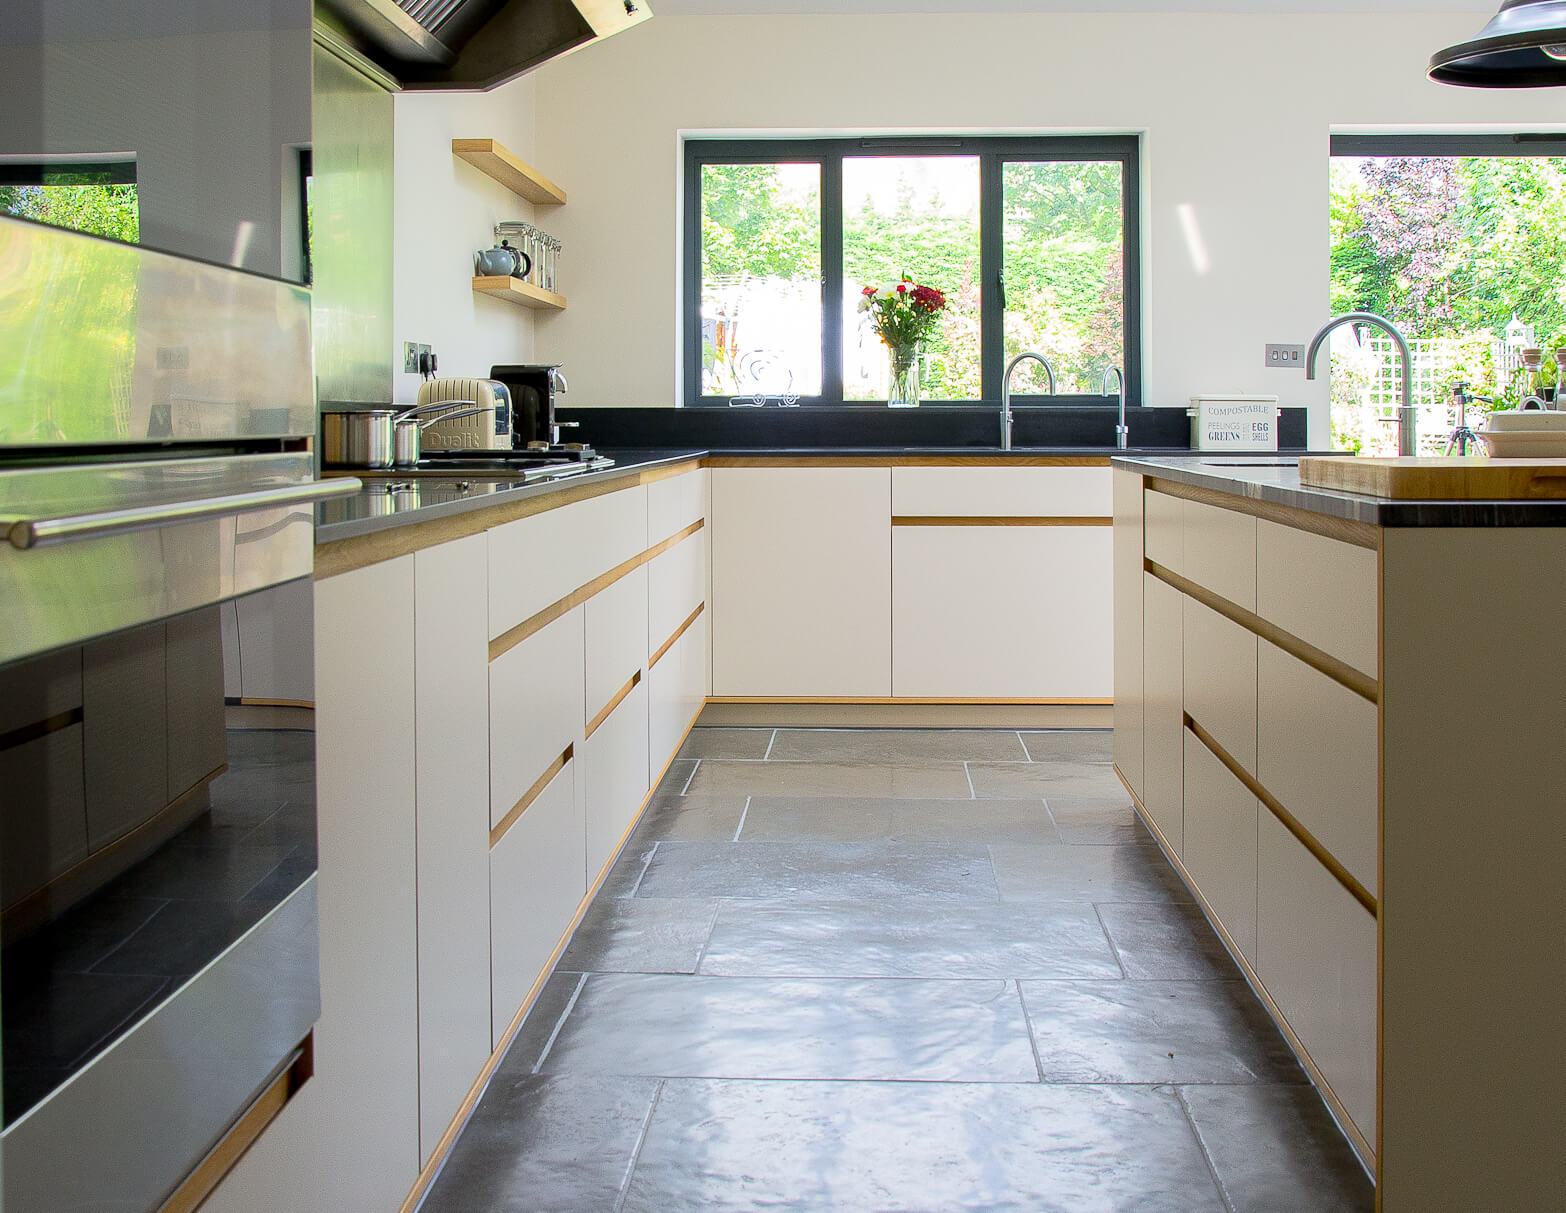 Heath Drive large hand made bespoke kitchen with birch plywood and laminate fronts, marble worktops and oak details made in Whitstable, Kent.